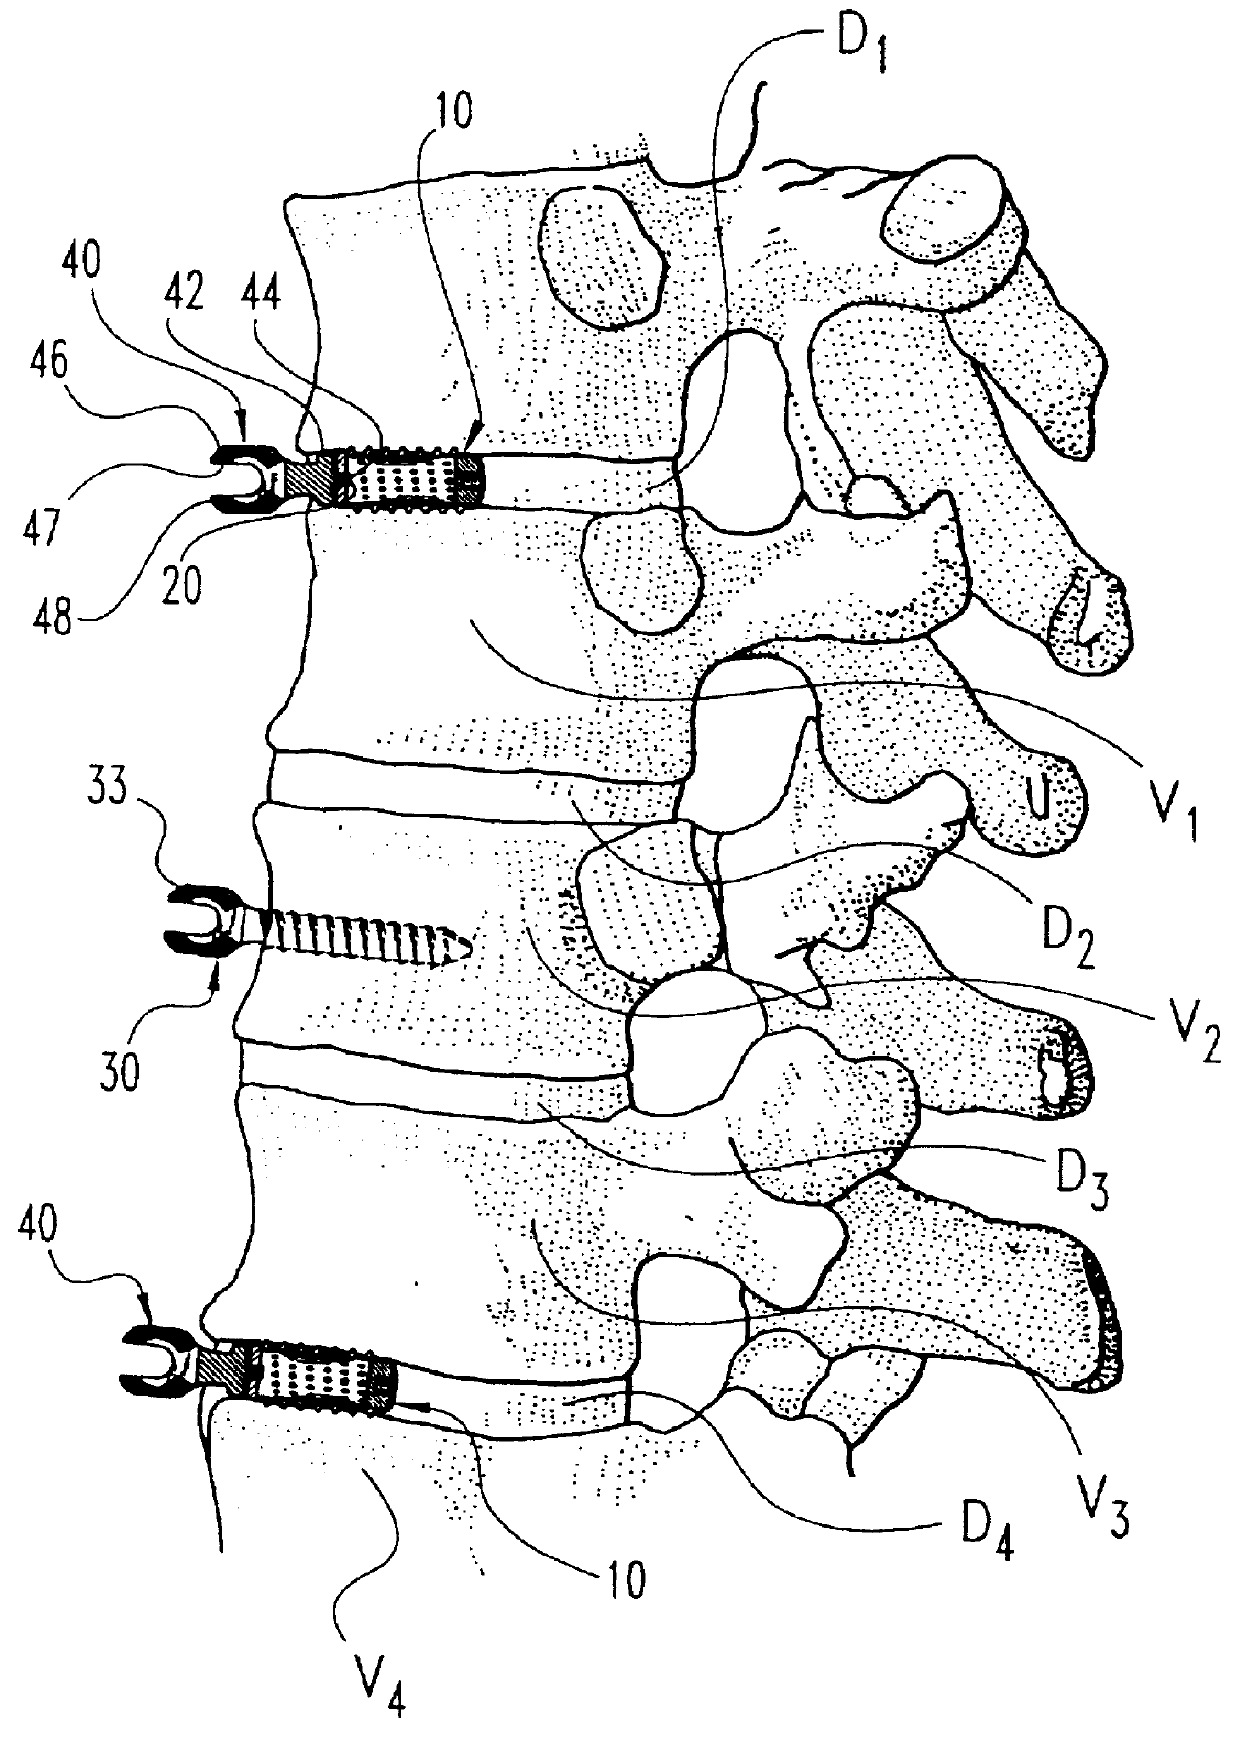 Anterior spinal instrumentation and method for implantation and revision